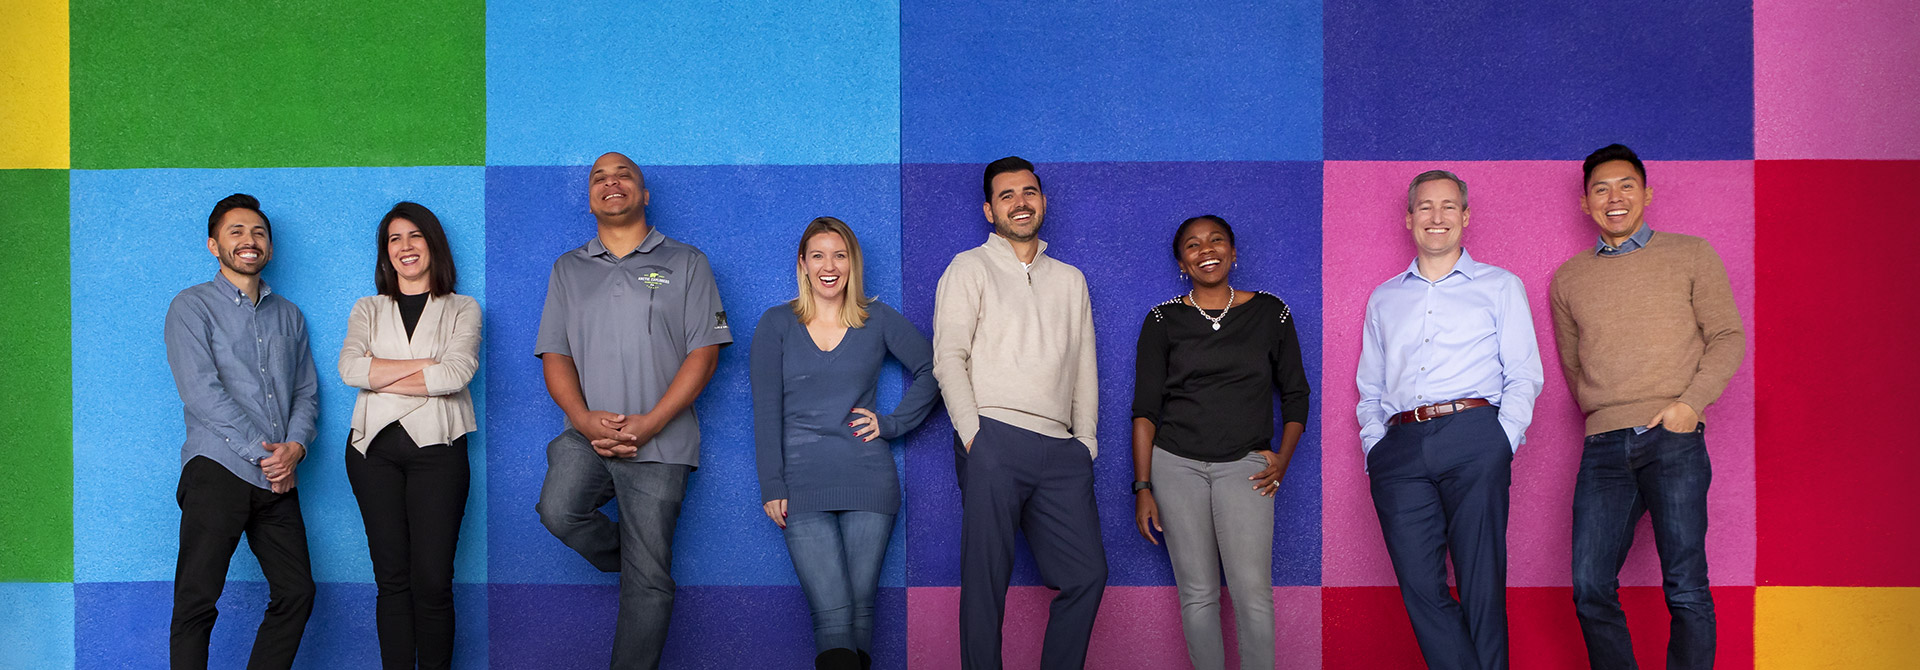 People in front of a colorfully painted wall